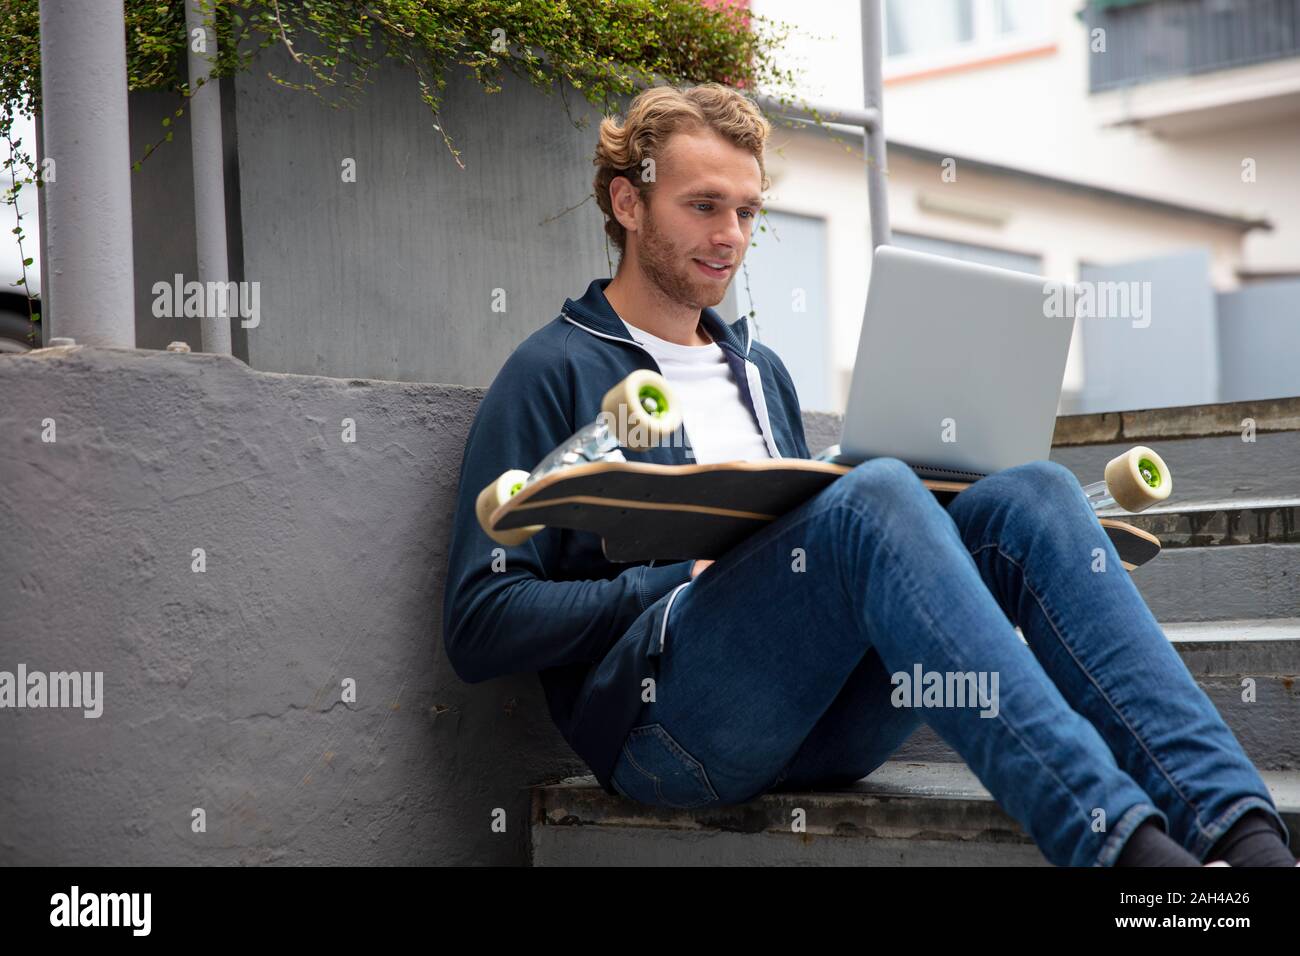 Young man sitting on steps, using laptop on longboard Stock Photo